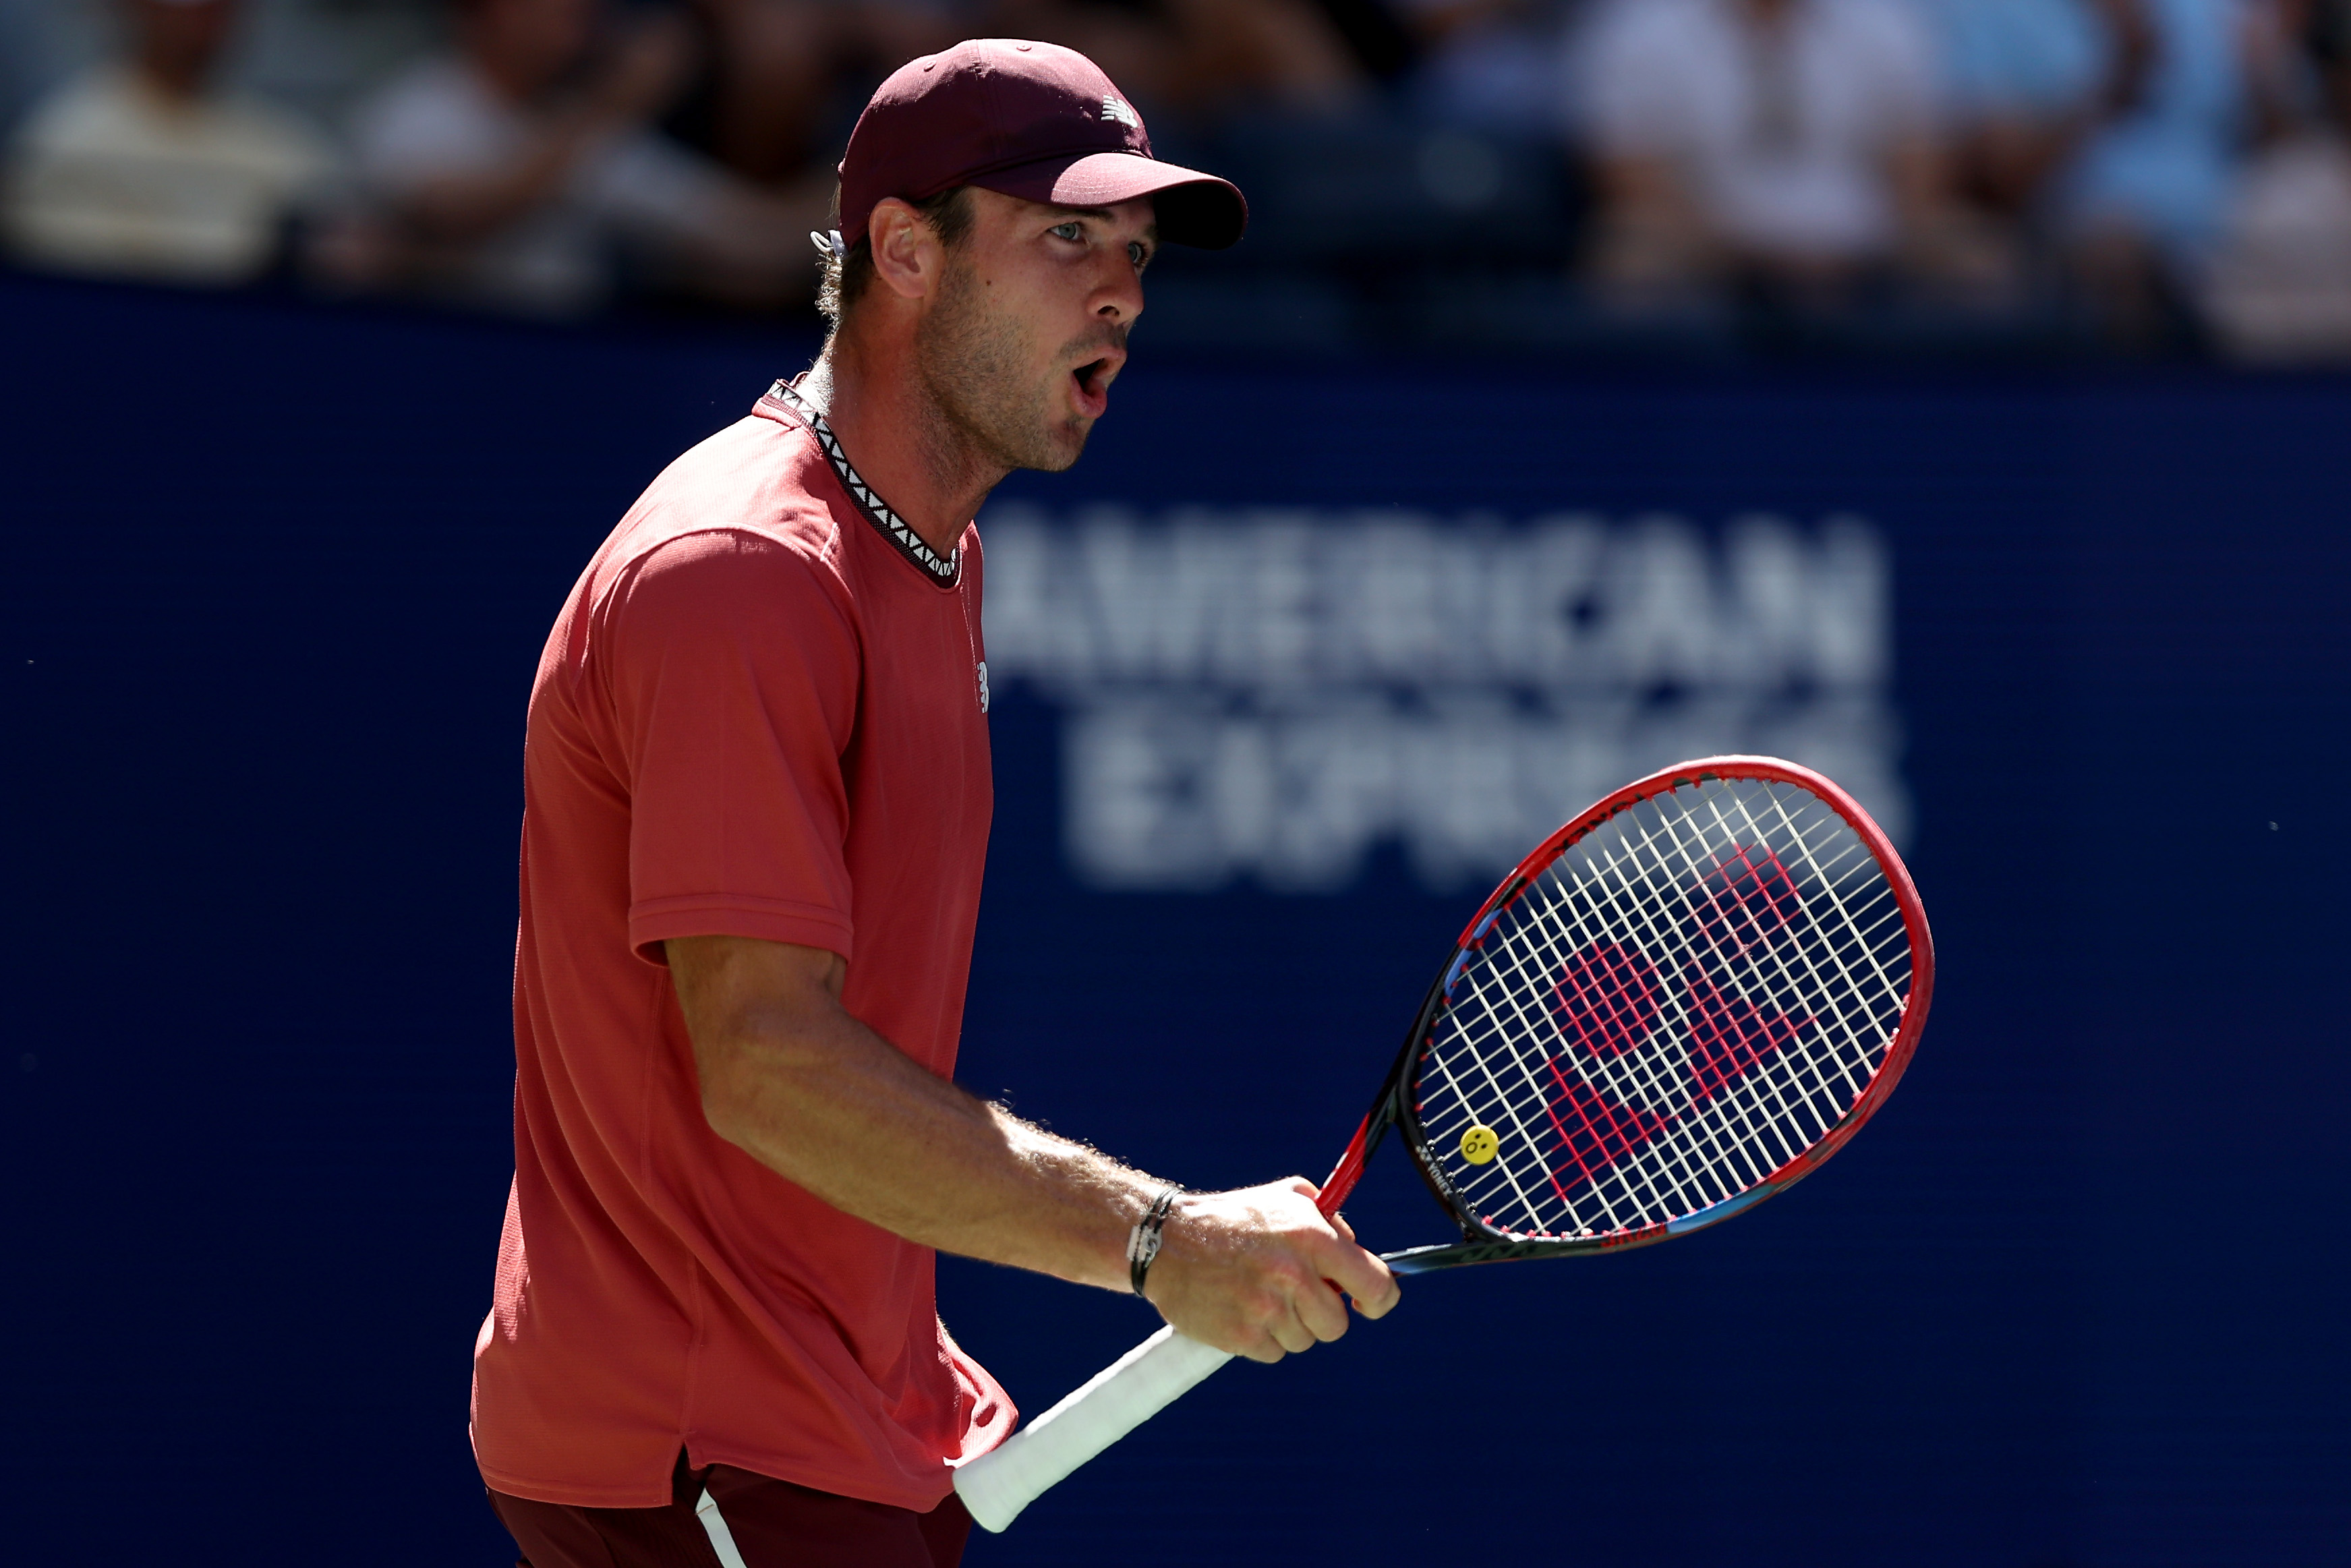 Tommy Paul of the United States reacts during his match against Alejandro Davidovich Fokina of Spain during their Men’s Singles Third Round match on Day Five of the 2023 US Open at the USTA Billie Jean King National Tennis Center on September 01, 2023 in the Flushing neighborhood of the Queens borough of New York City.